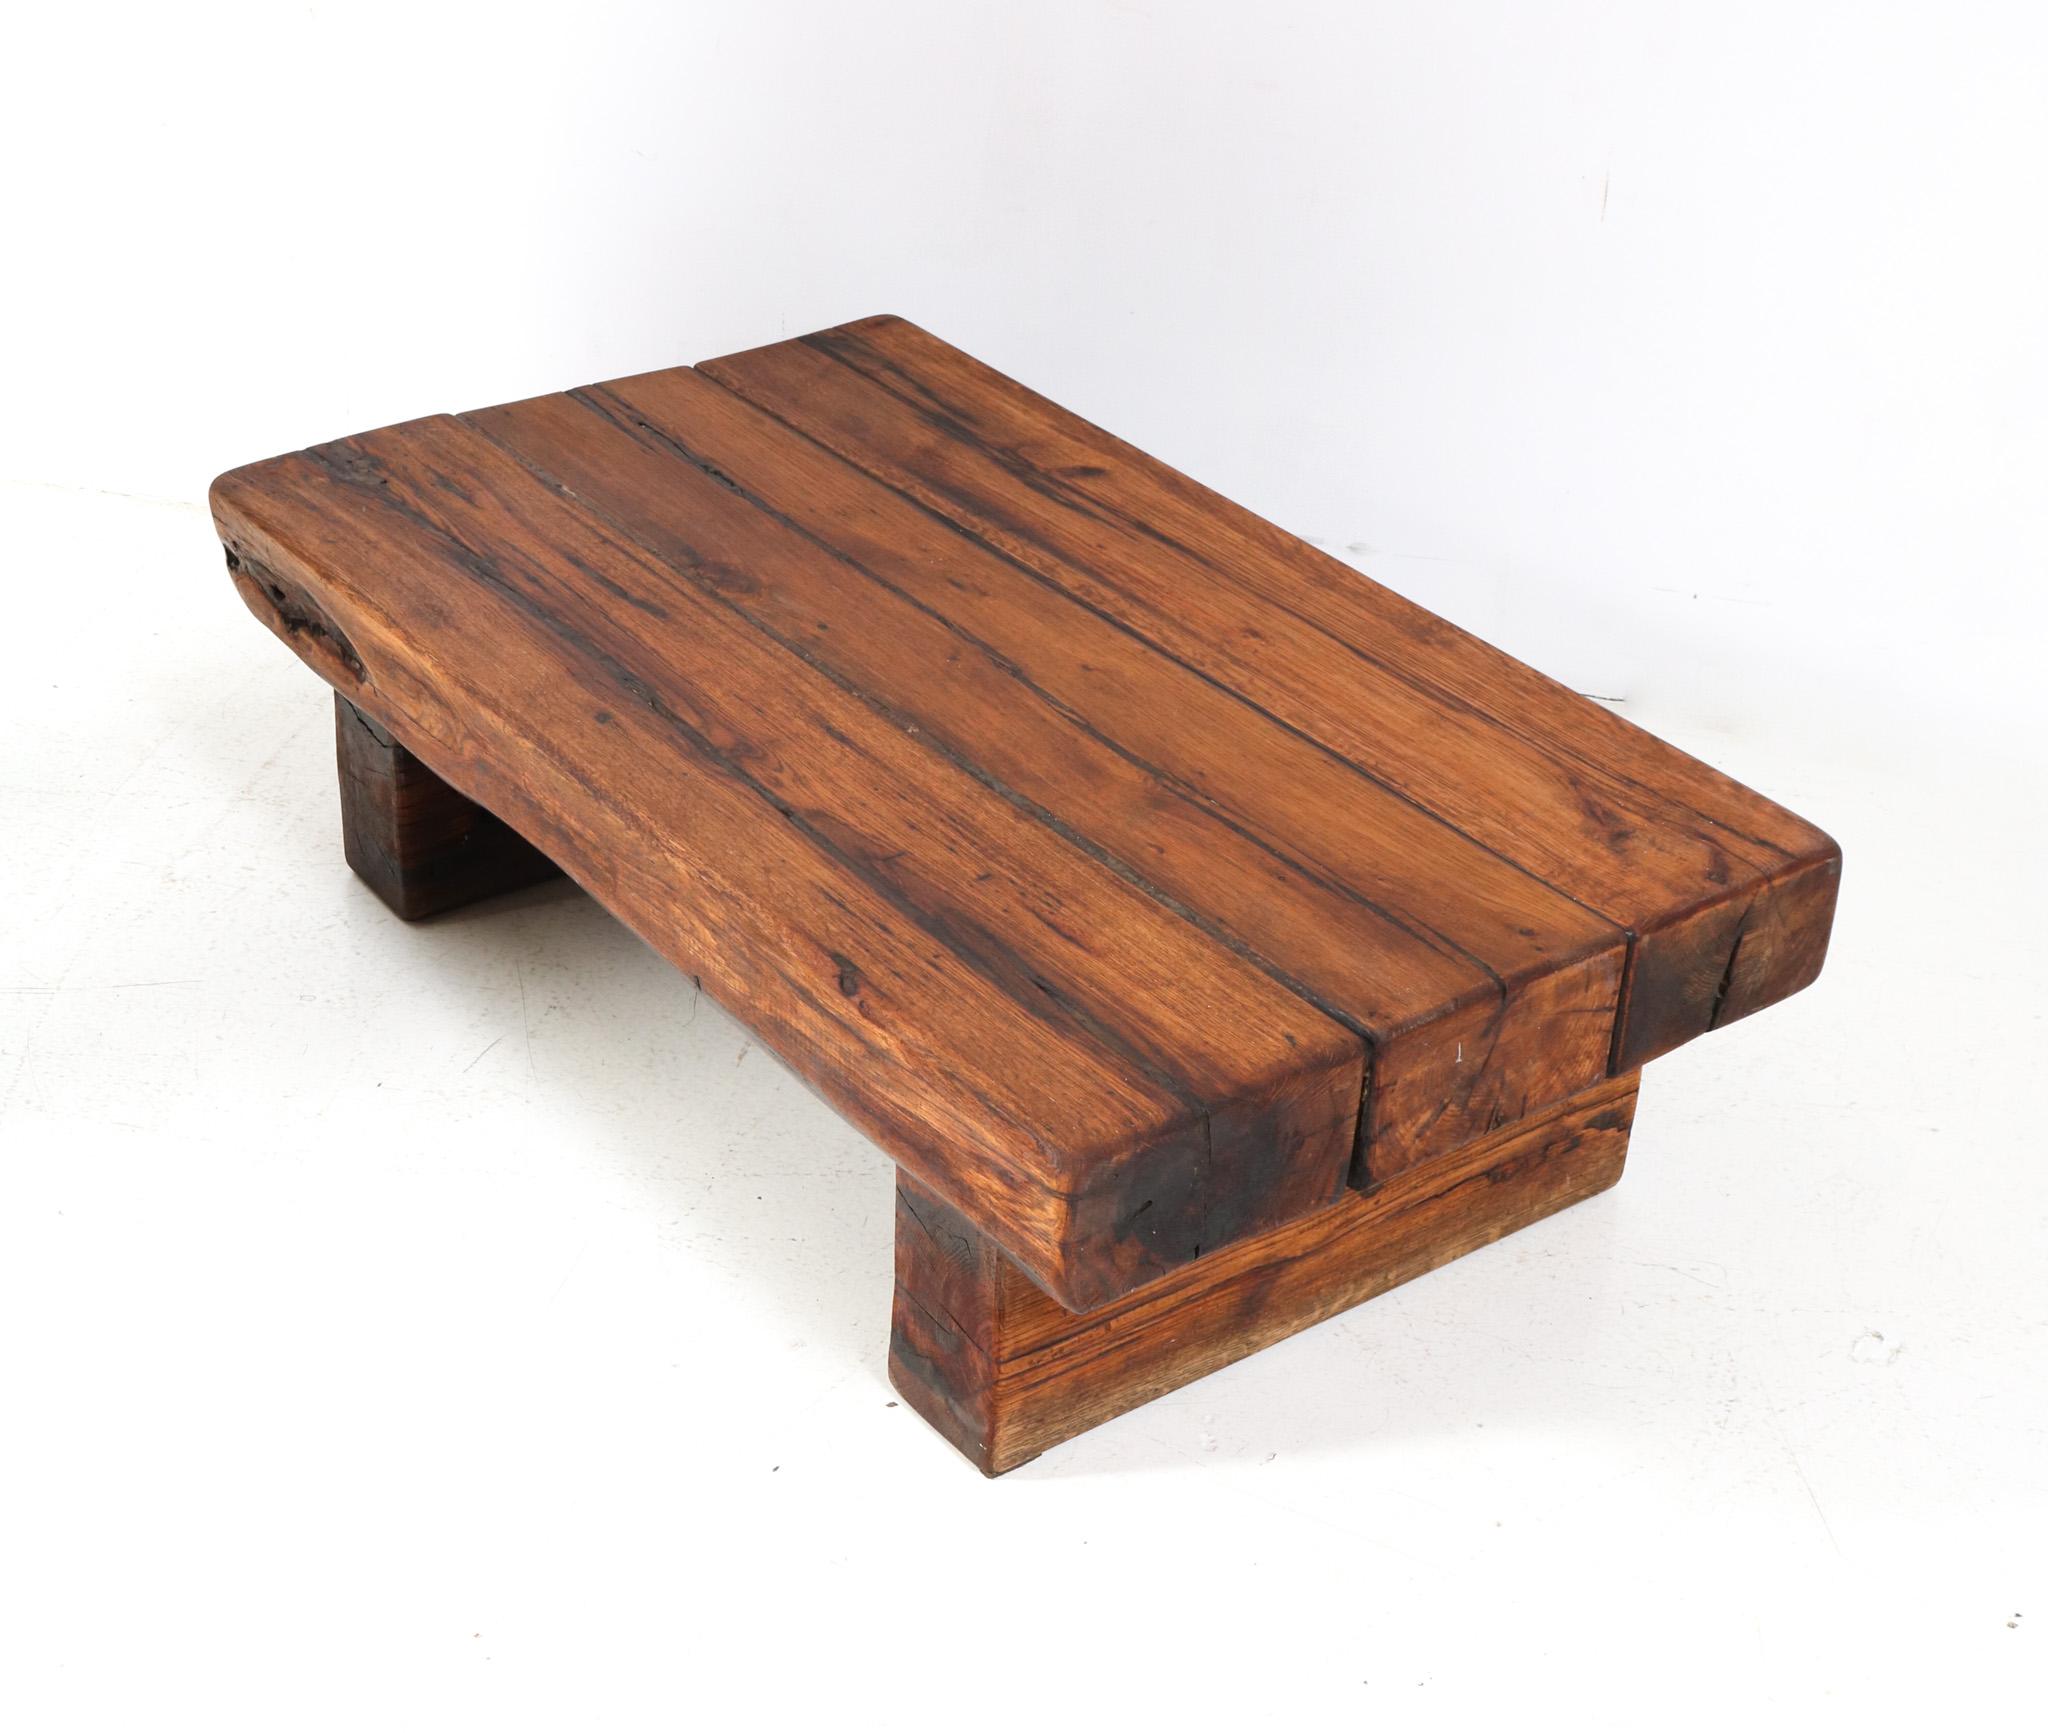 Oak Brutalist Rustic Coffee Table or Cocktail Table, 1960s For Sale 4